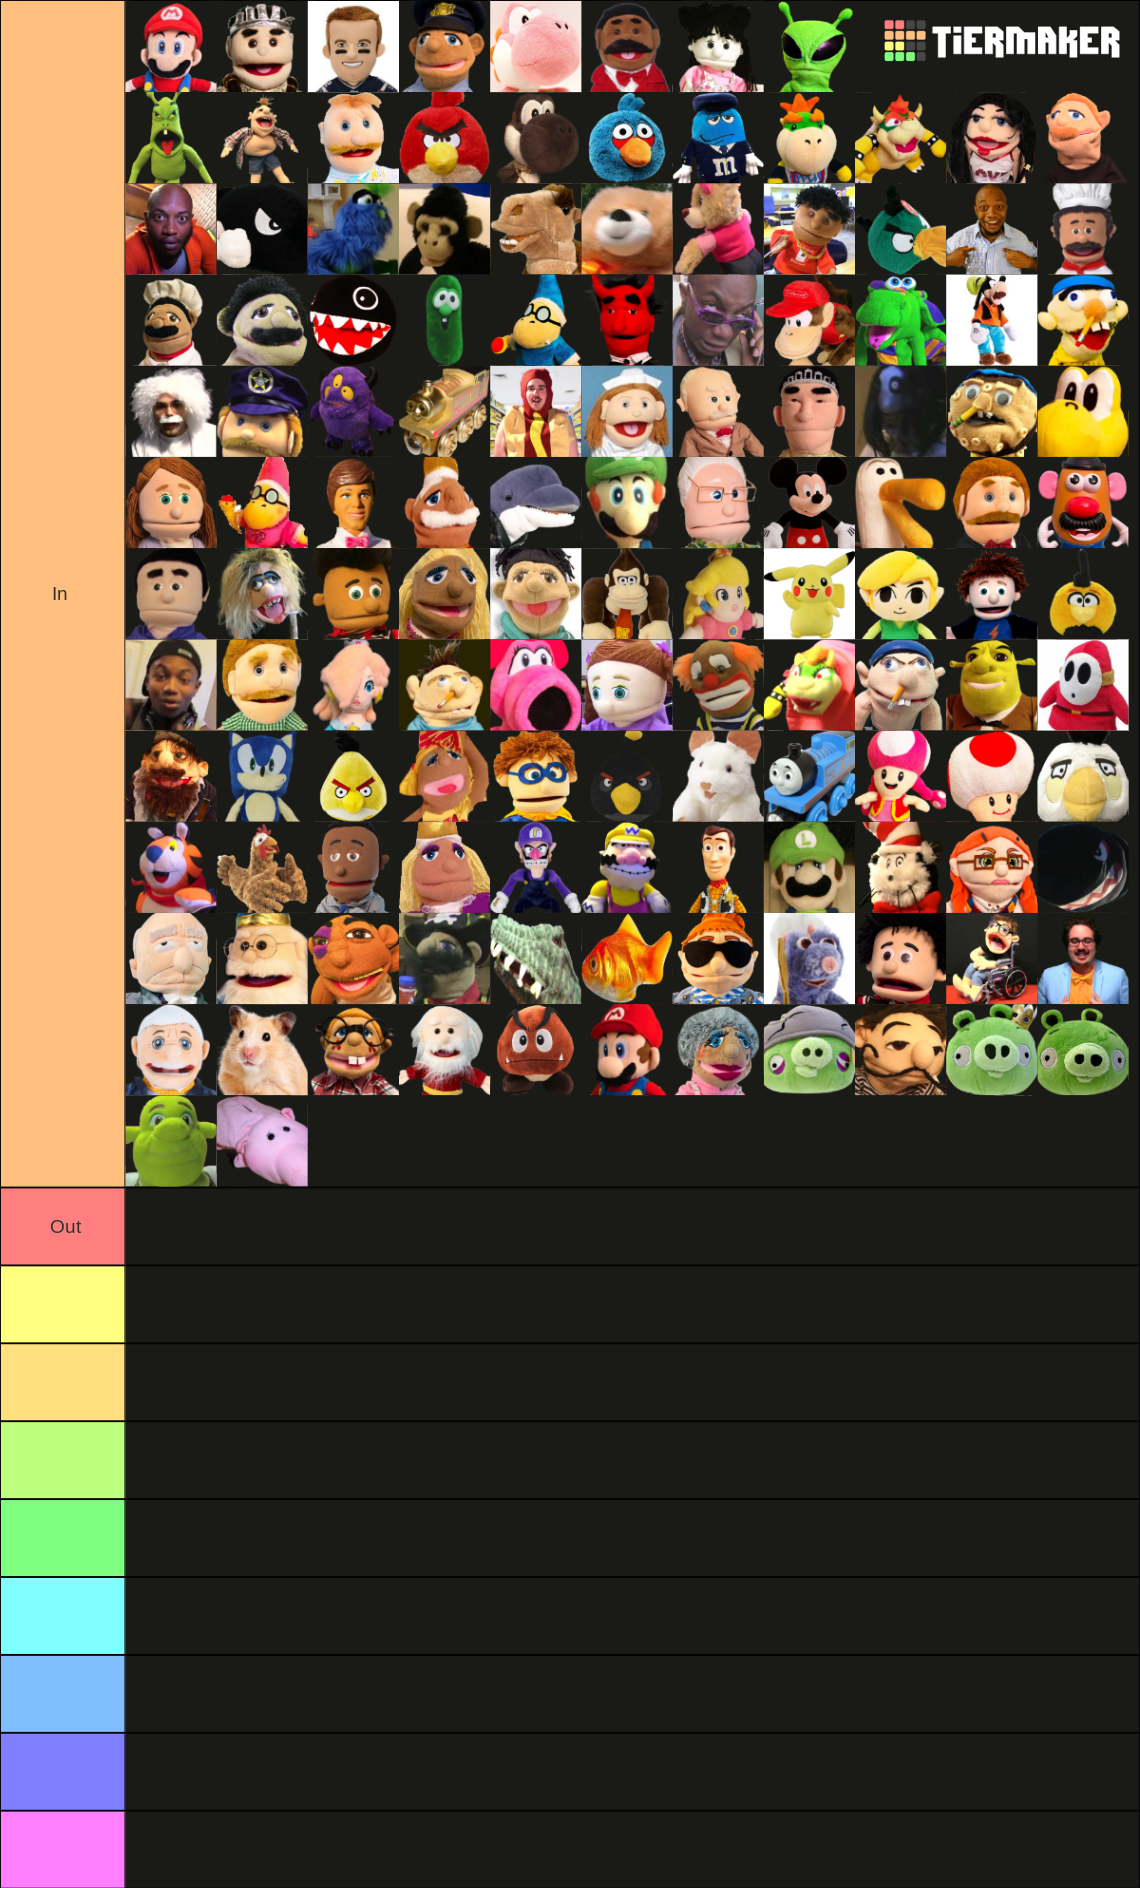 The Ultimate SML SuperMarioLogan Character Tier List